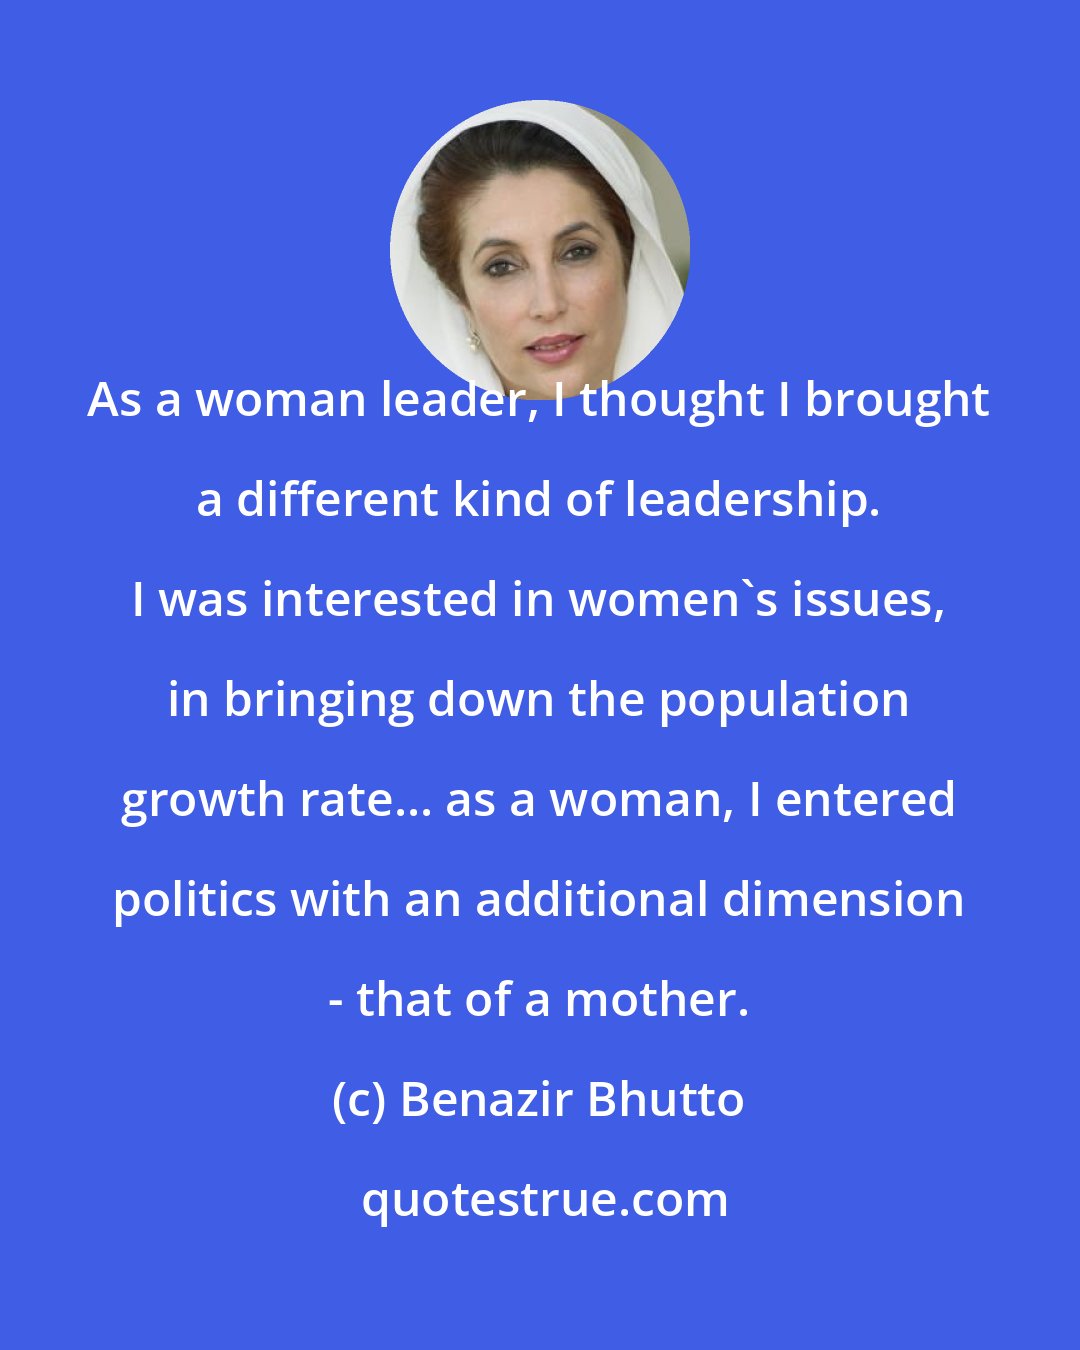 Benazir Bhutto: As a woman leader, I thought I brought a different kind of leadership. I was interested in women's issues, in bringing down the population growth rate... as a woman, I entered politics with an additional dimension - that of a mother.